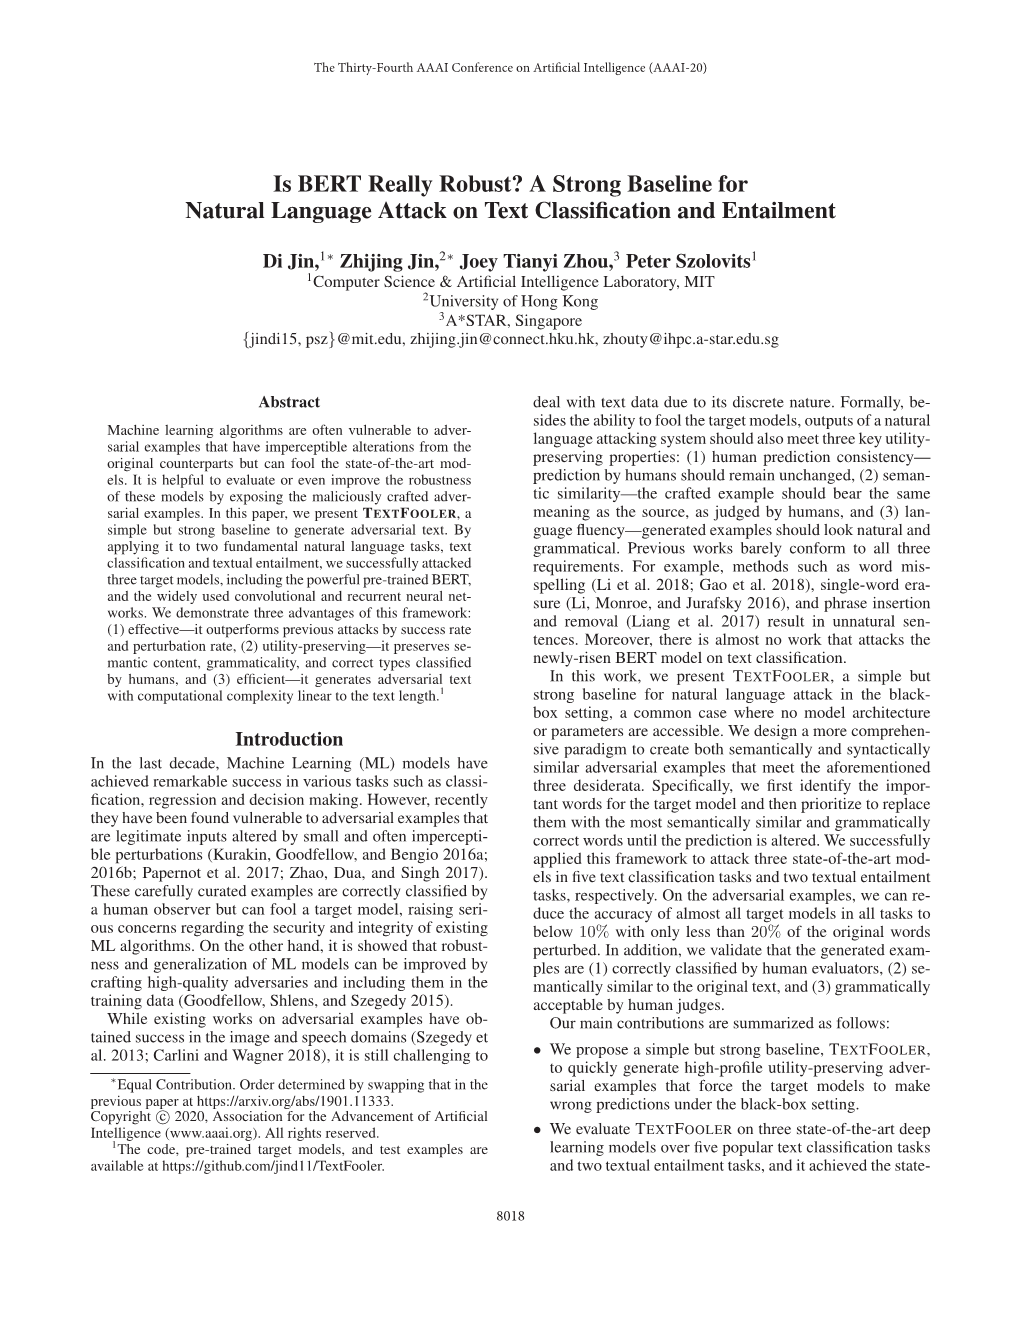 Is BERT Really Robust? a Strong Baseline for Natural Language Attack on Text Classiﬁcation and Entailment